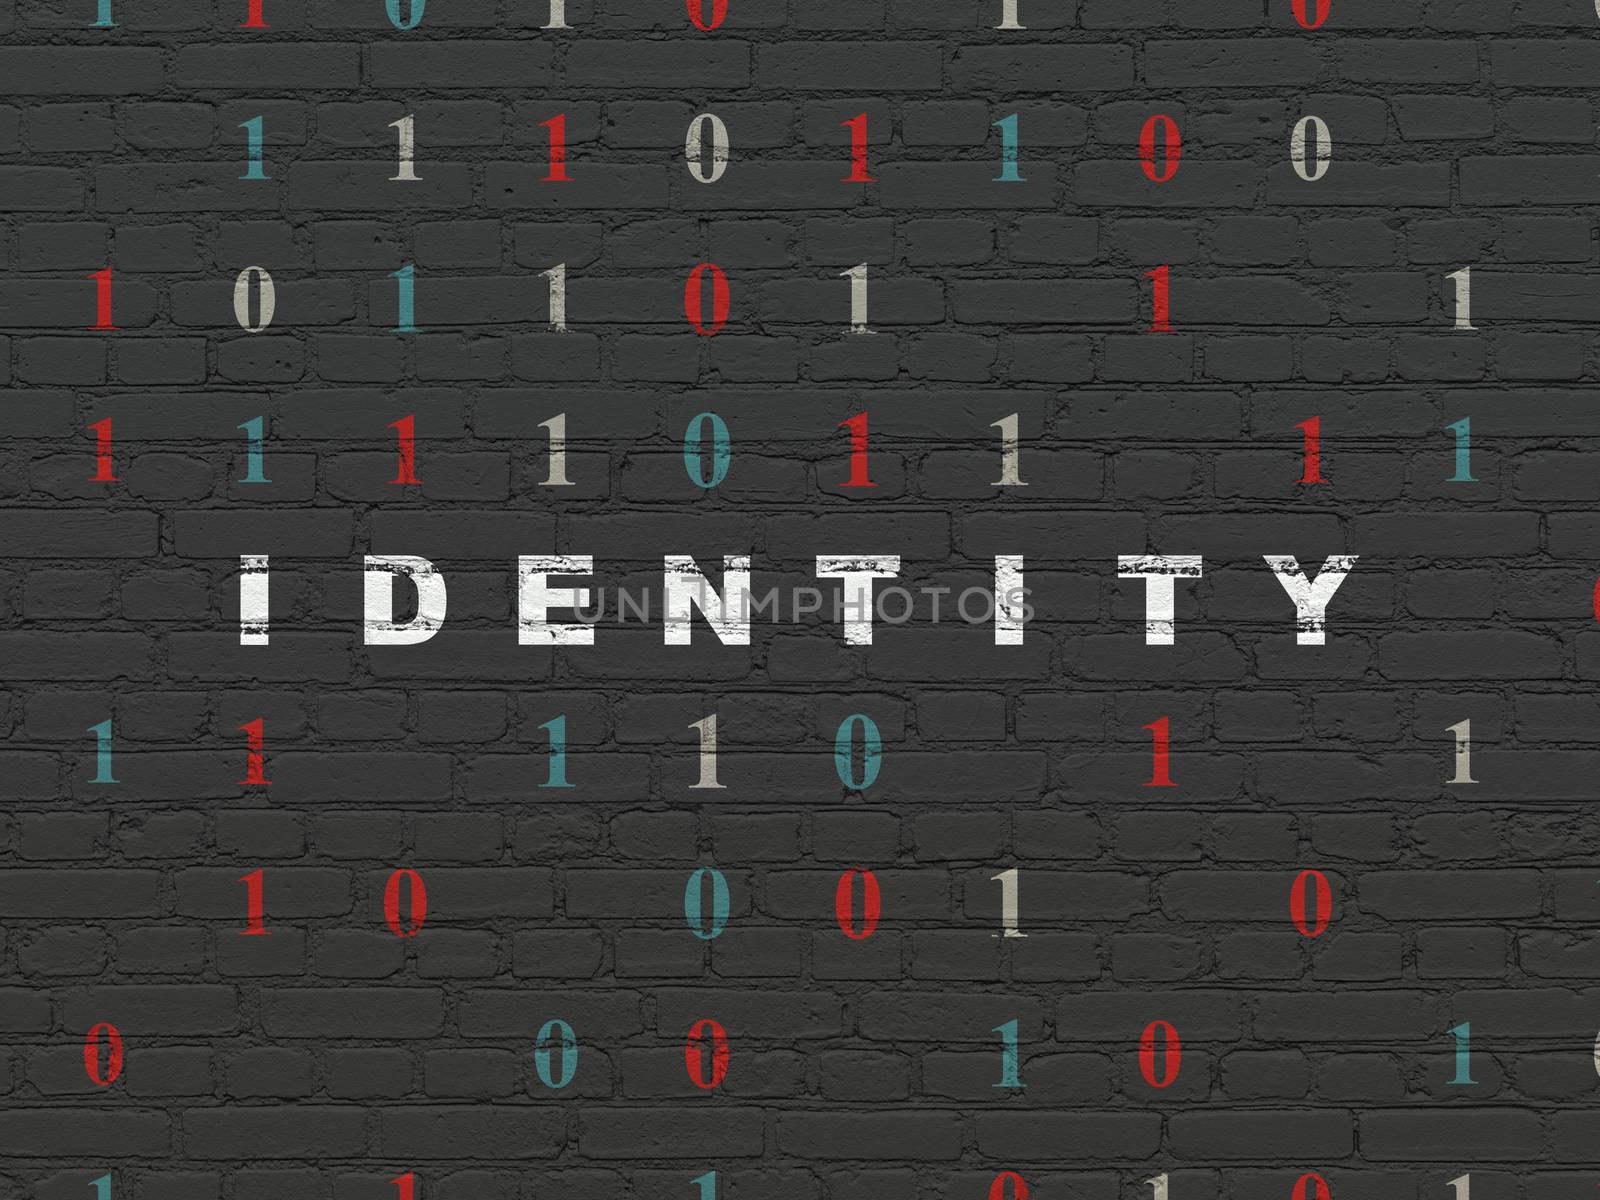 Security concept: Painted white text Identity on Black Brick wall background with Binary Code